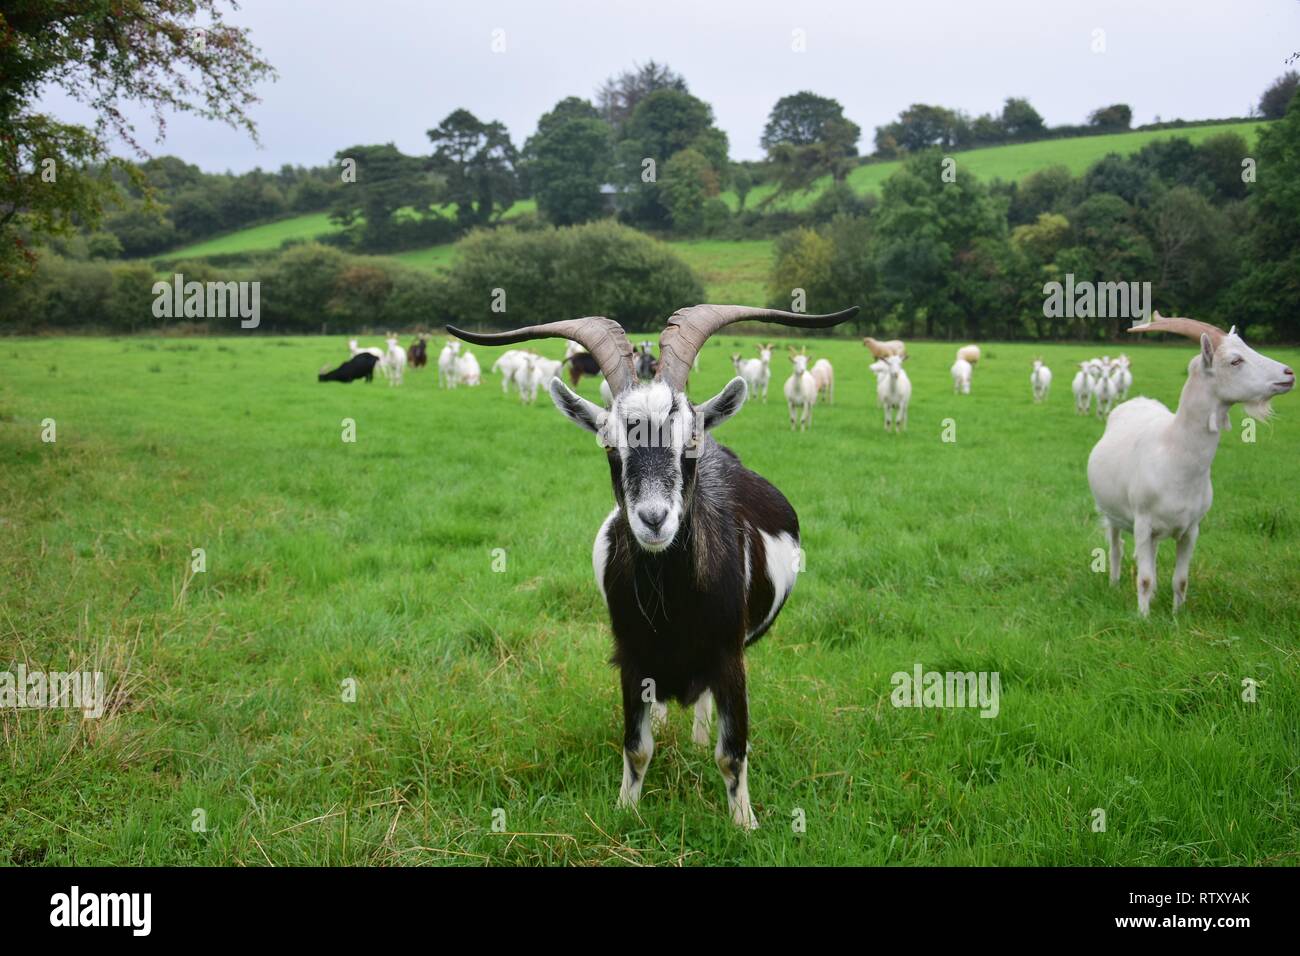 A herd of goats in Ireland. One male goat with horns standing in front and looking curiously. Stock Photo